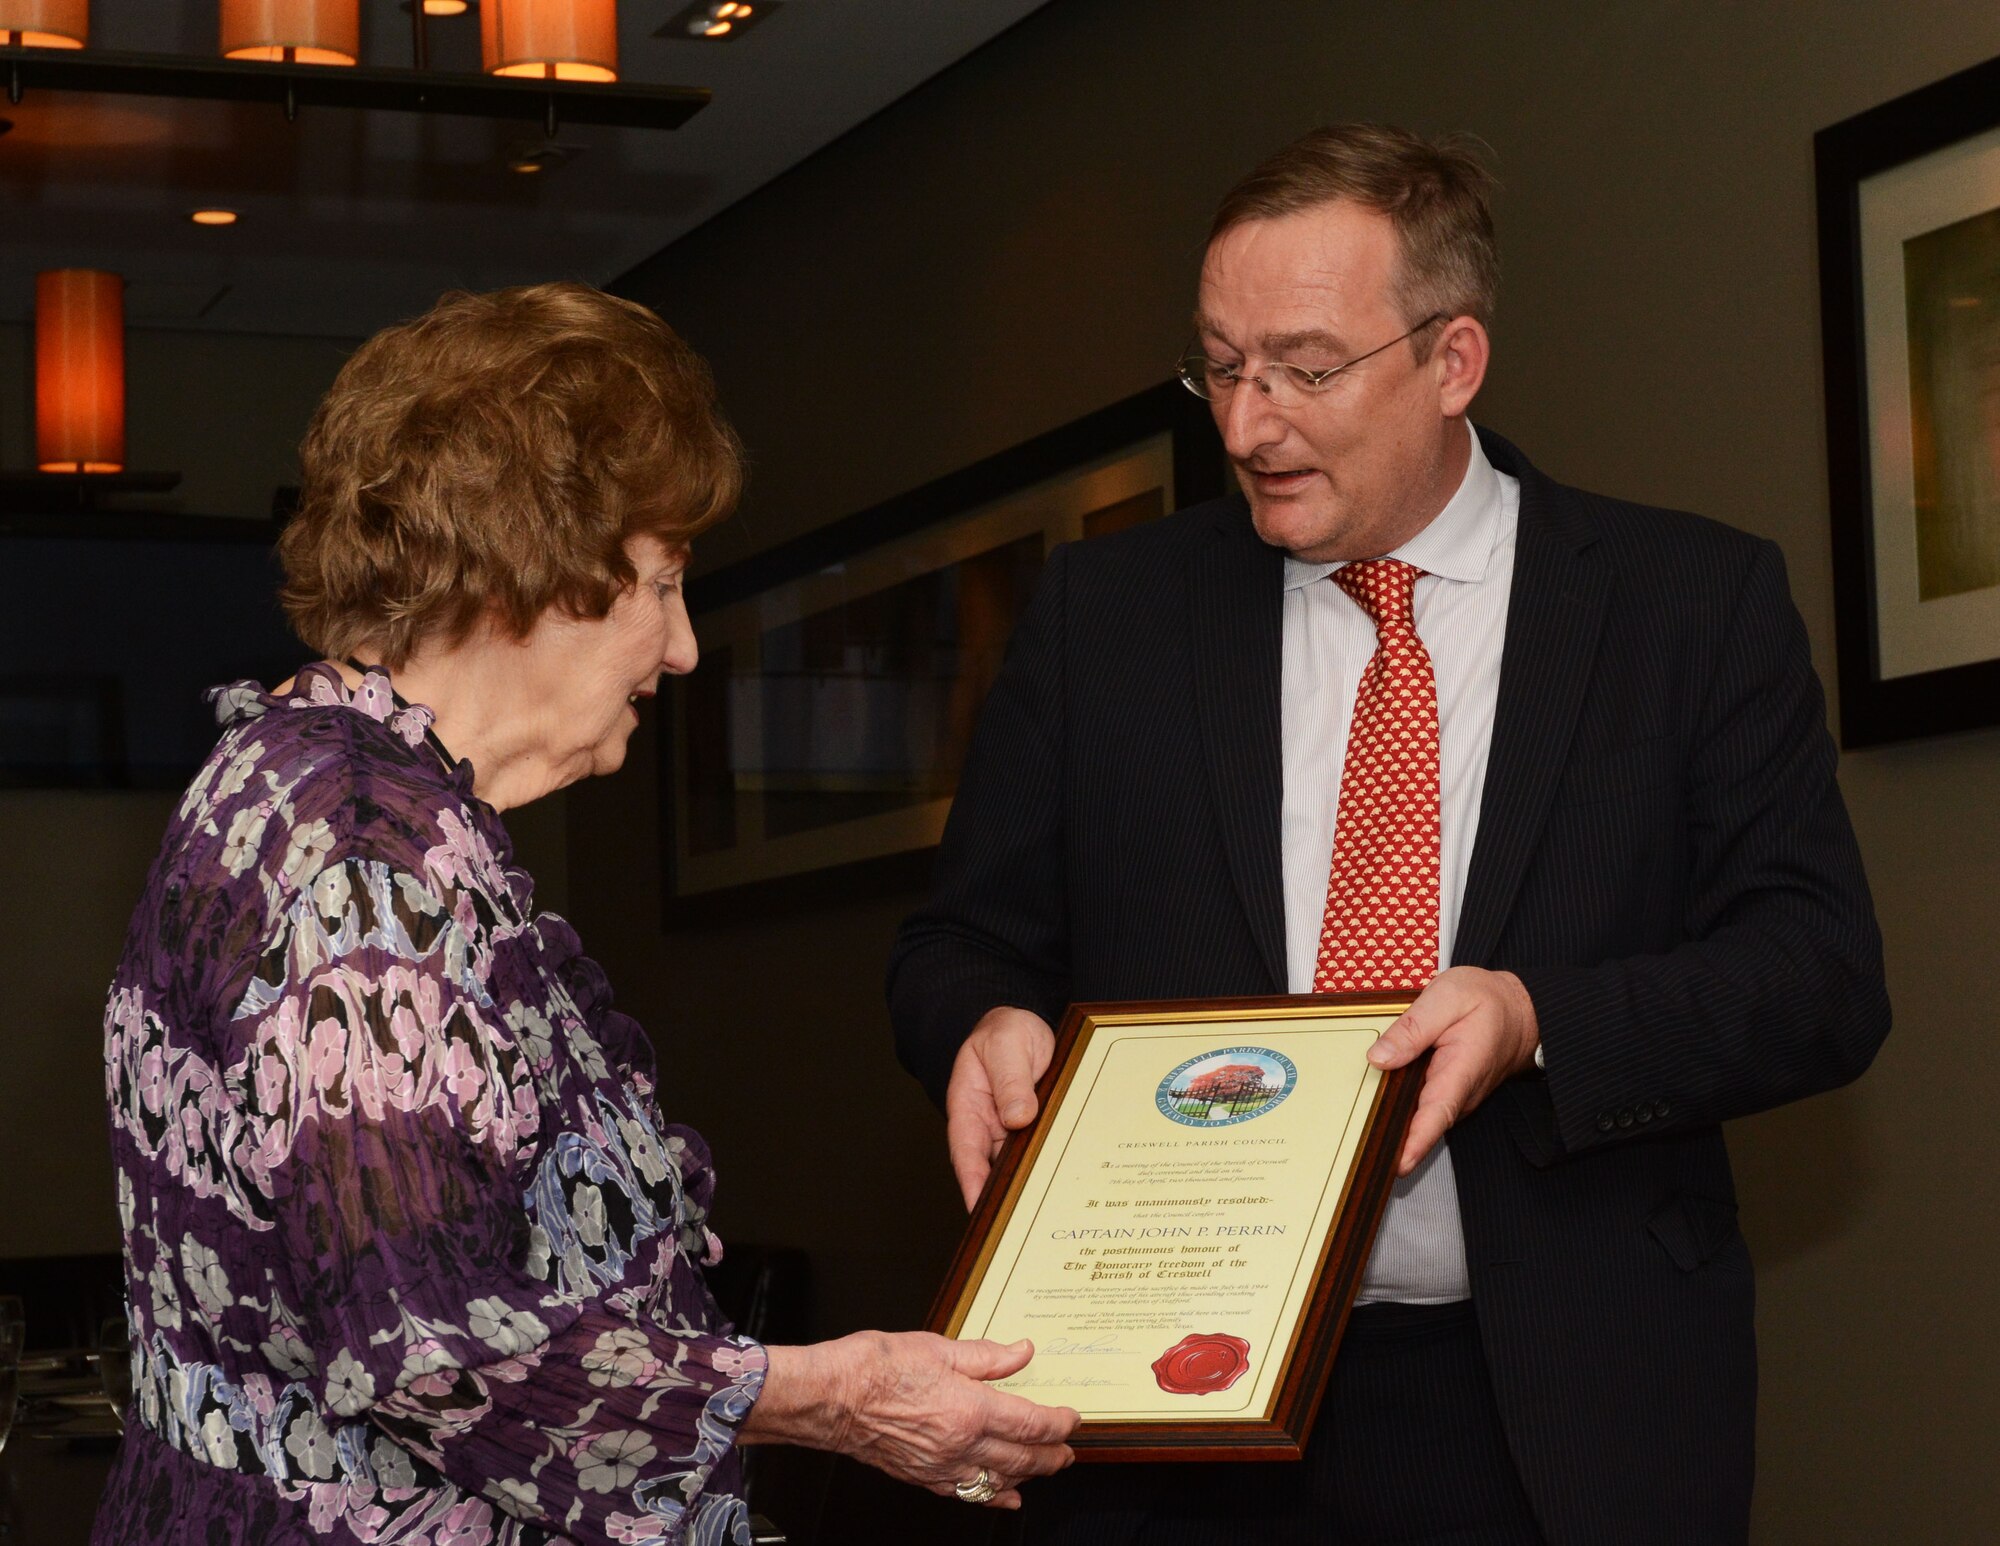 Helen Perrin, family member of Capt. John Perrin, accepts the freedom scroll from Her Britannic Majesty’s Consul-General Andrew Millar June 26, 2014, in Dallas. Perrin steered his failing aircraft away from the populated areas of Stafford and Creswell, England, resulting in the loss of his life. (Photo by Staff Sgt. Samantha Mathison)